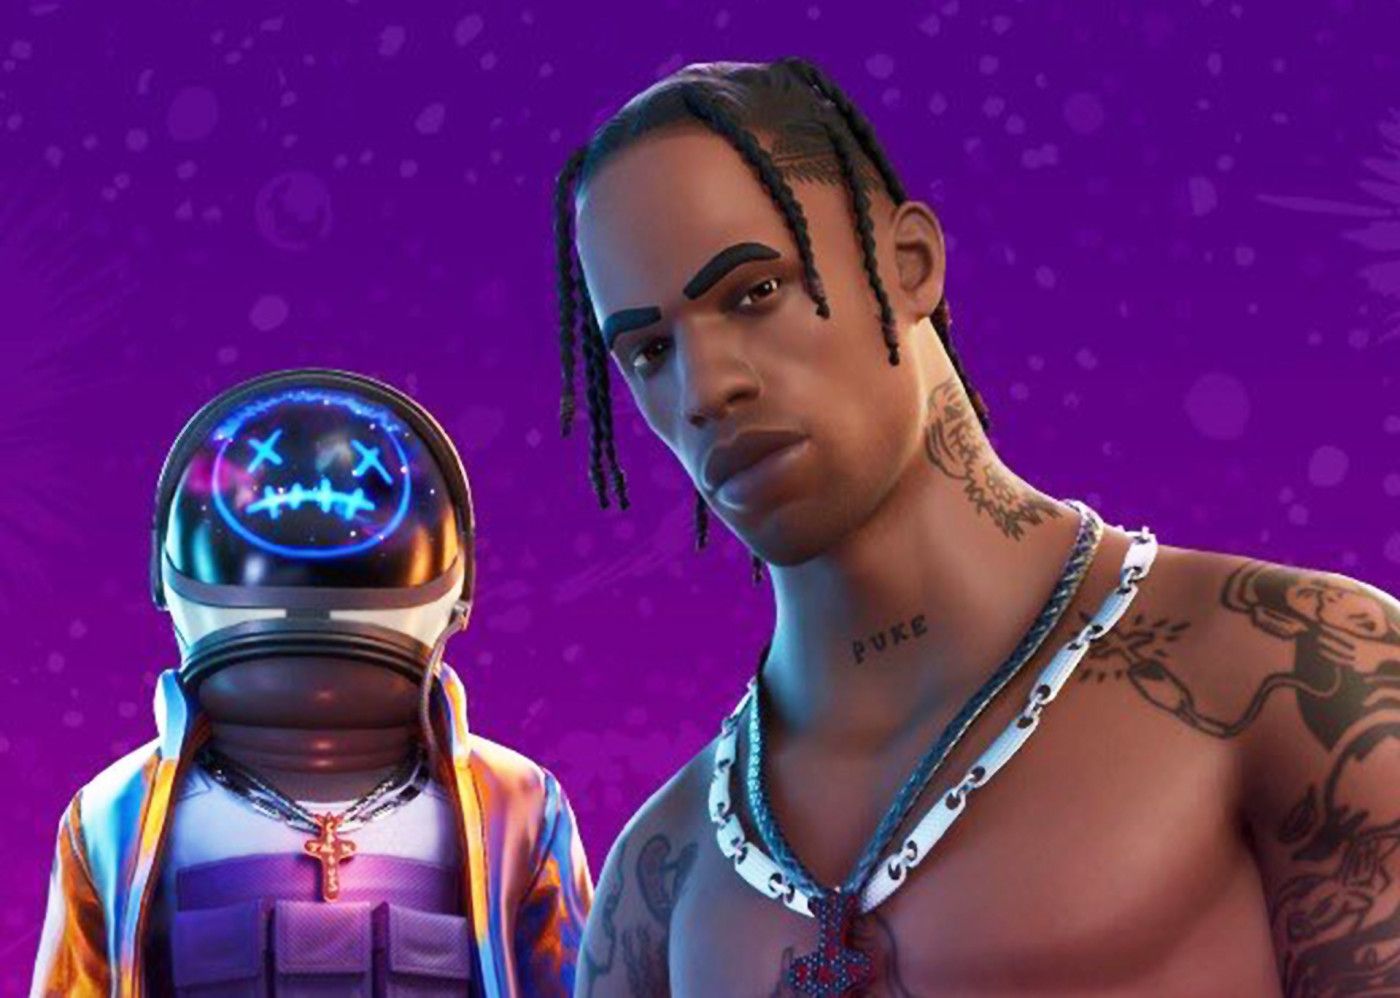 Travis Scott's 'Fortnite' Concert: What to Expect and How to Watch